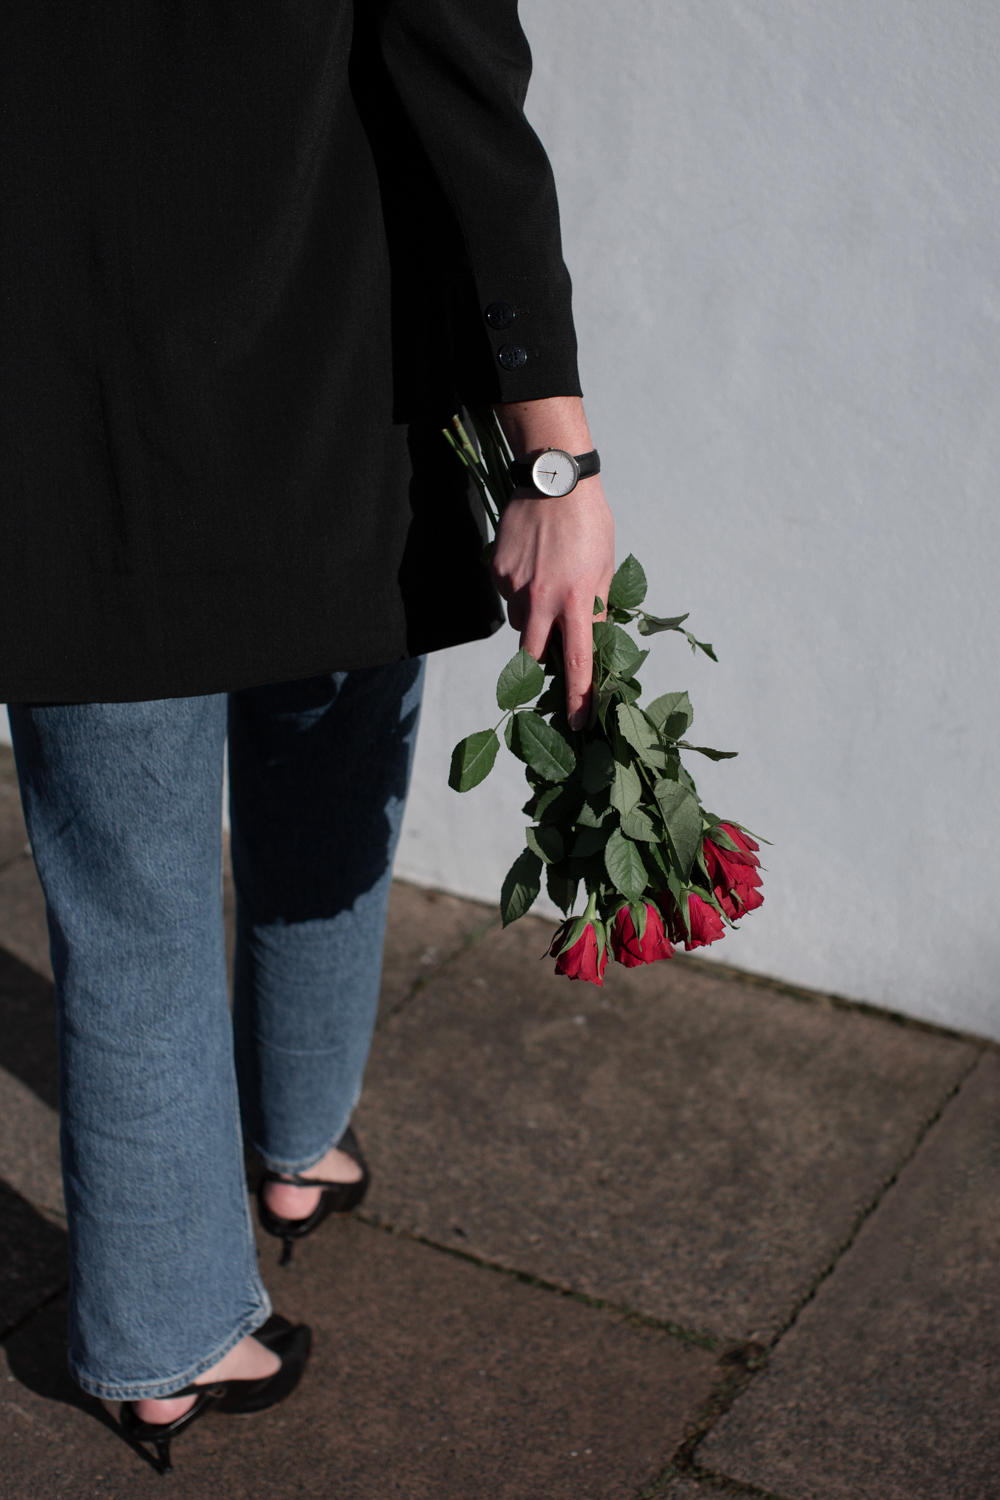 Besma wears Nordgreen watch carrying roses